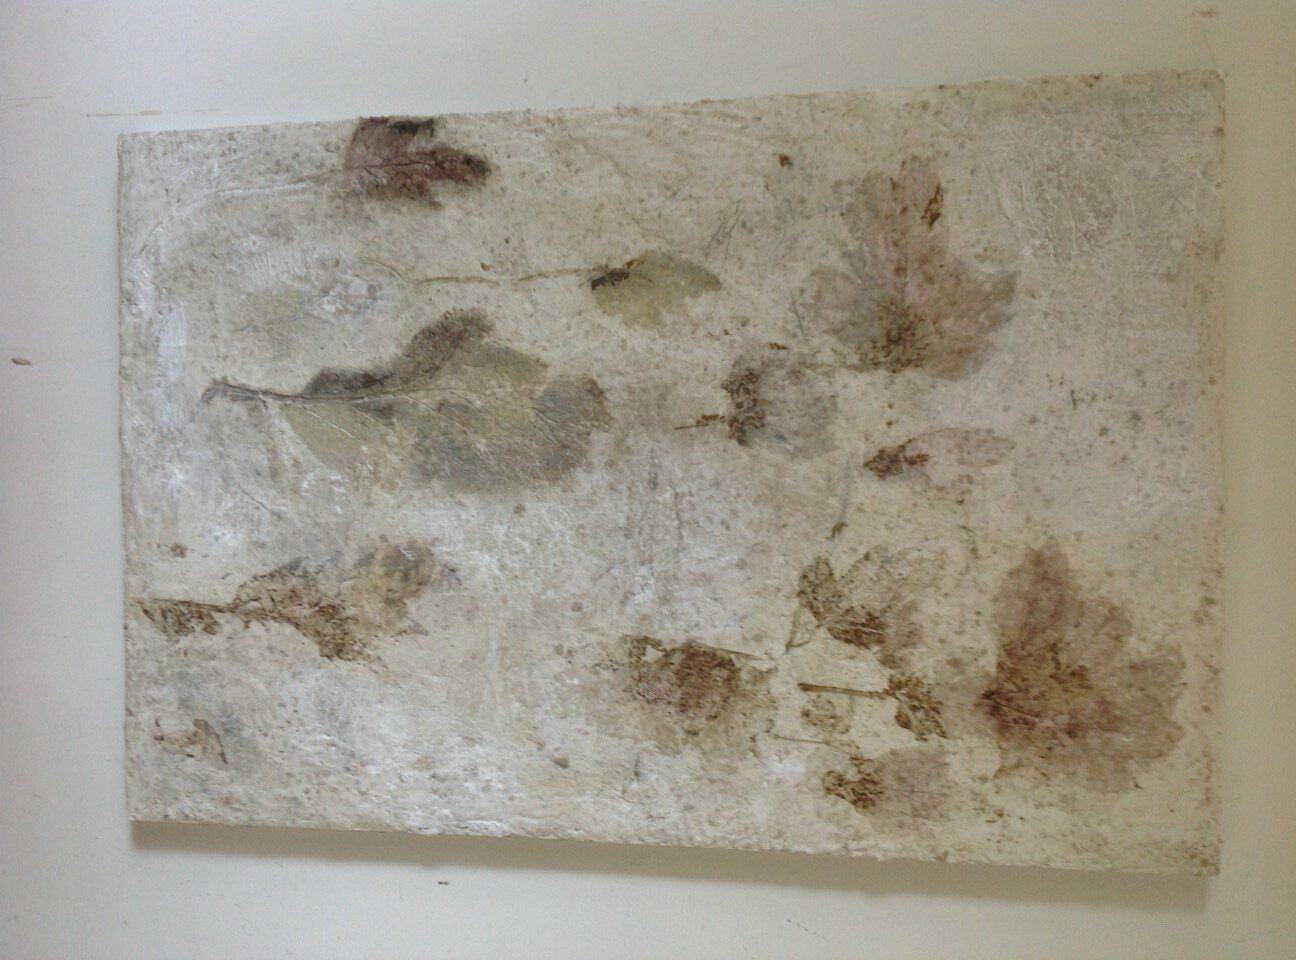 concrete panel with various abstract leaf impressions